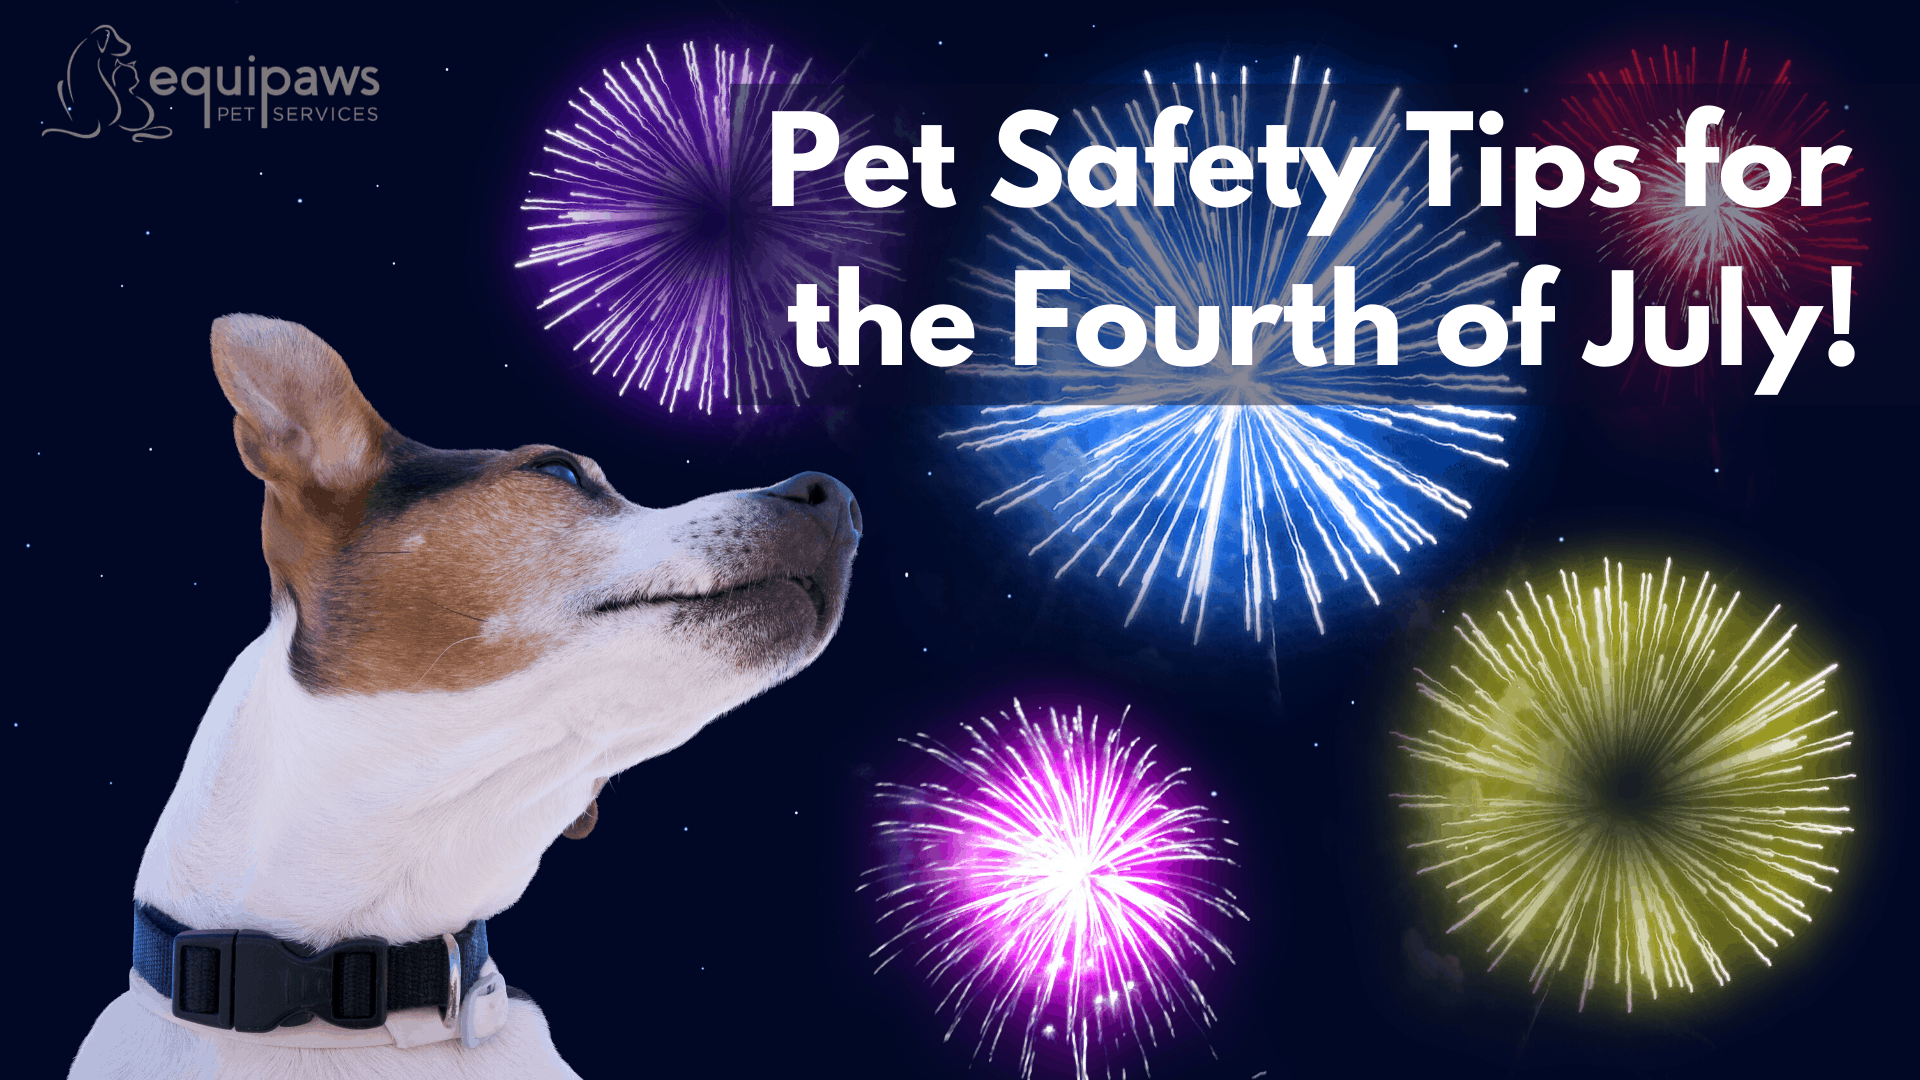 Pet Safety tips for the fourth of July